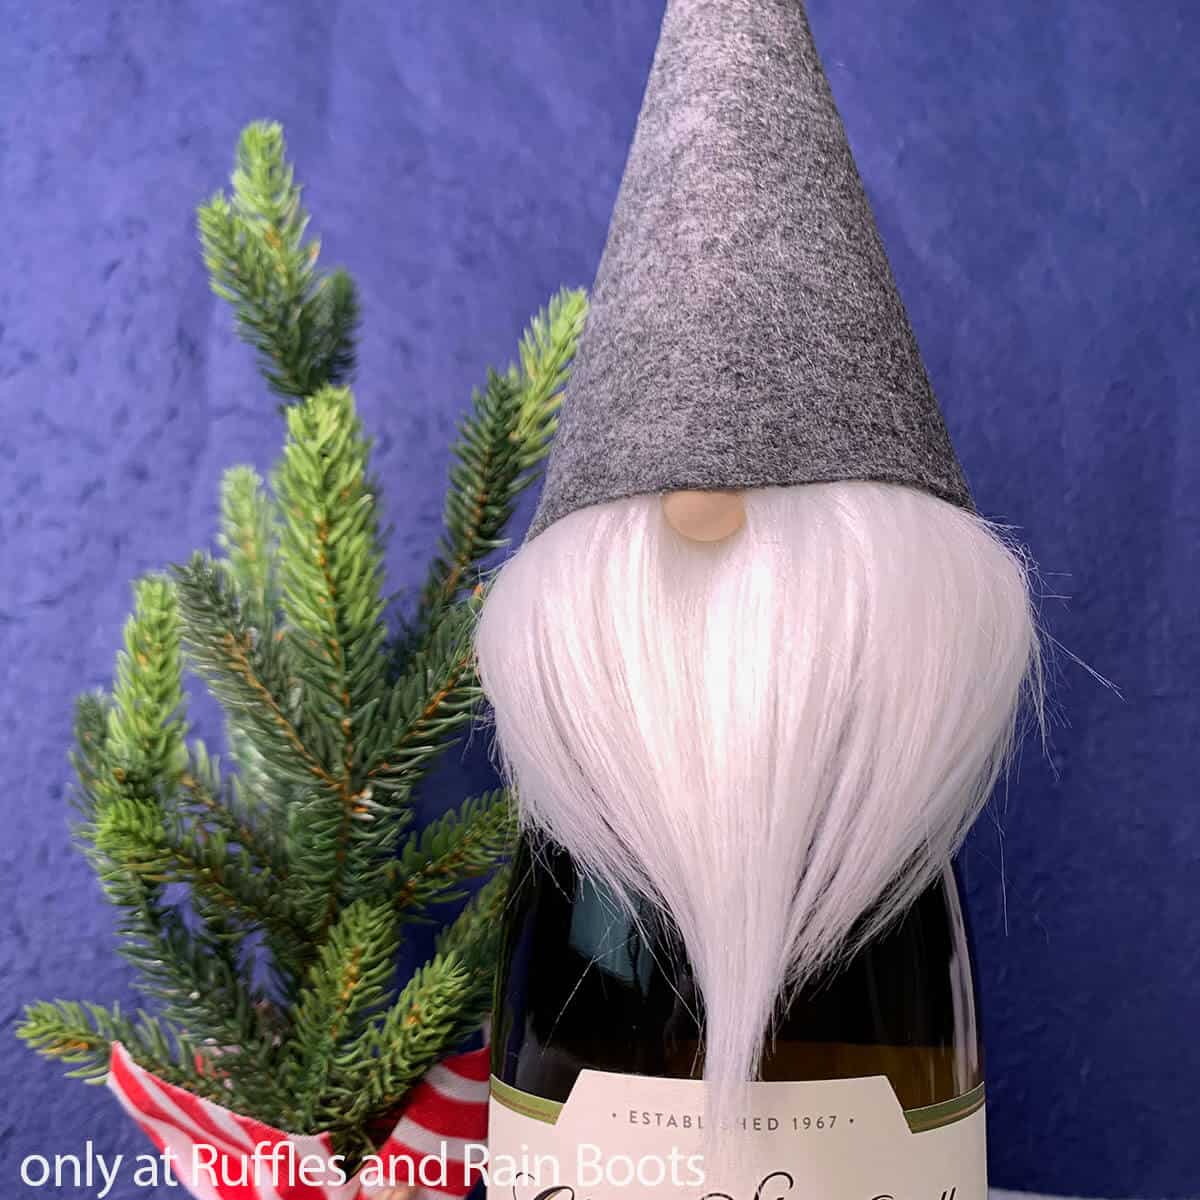 Square close up image of a gray hat felt gnome wine bottle topper with white beard on a bottle of wine next to a mini pine tree in front of a blue background.